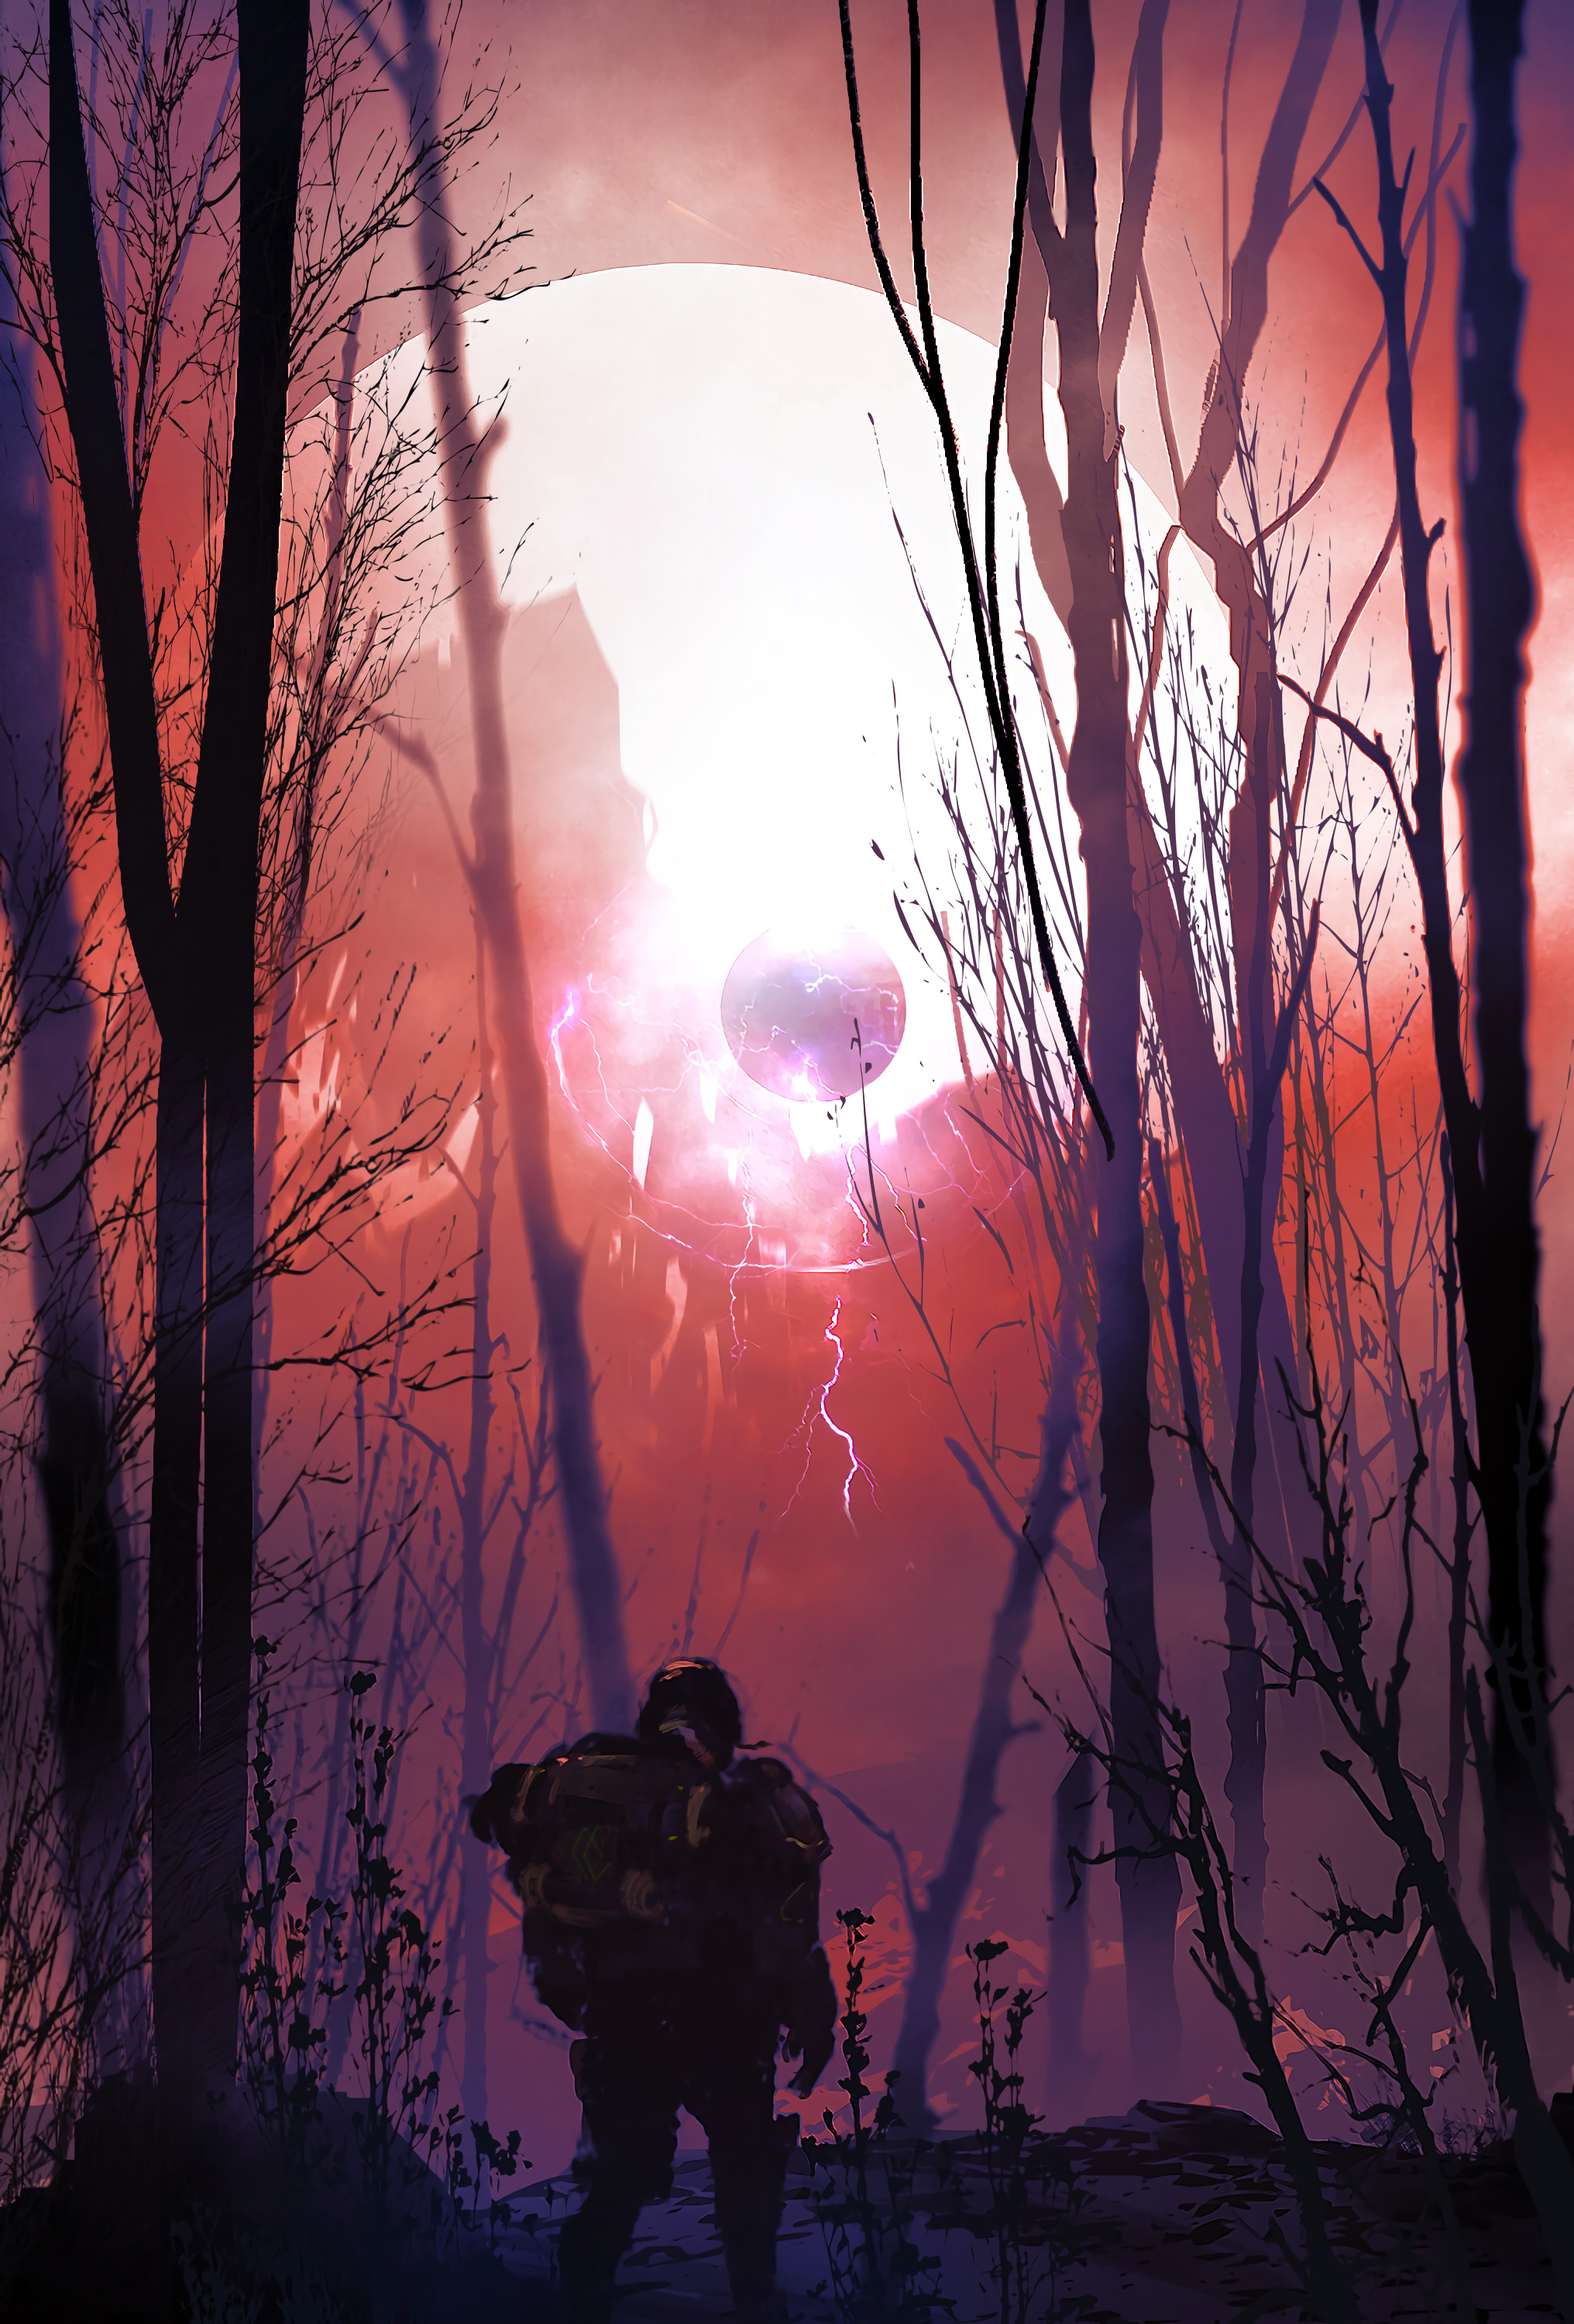 soldier, art, sci fi, fiction, silhouette, that's incredible cellphone